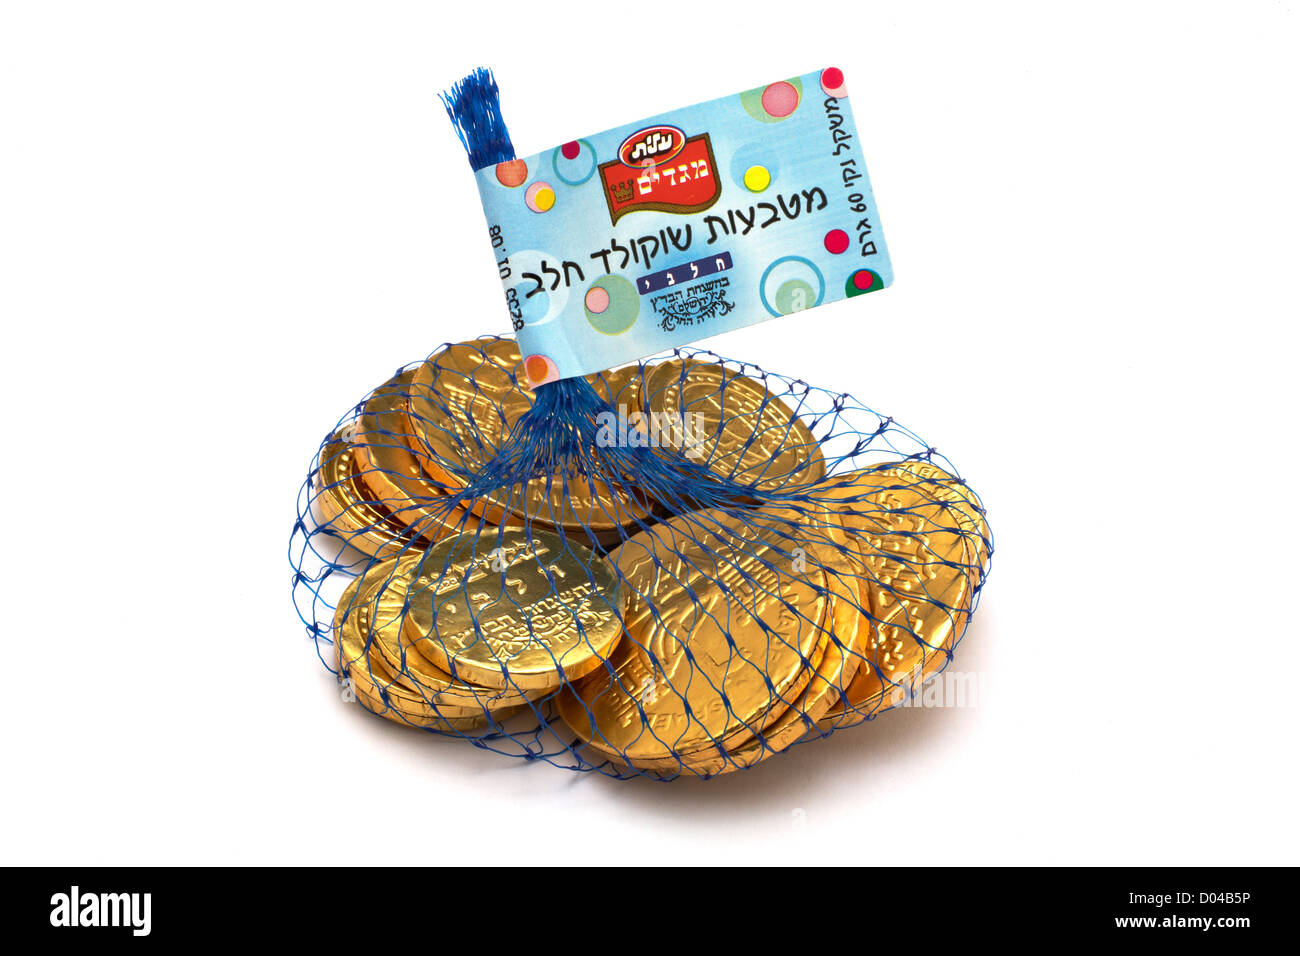 Bag of Chocolate Gold Coins with Hebrew writing on label Stock Photo